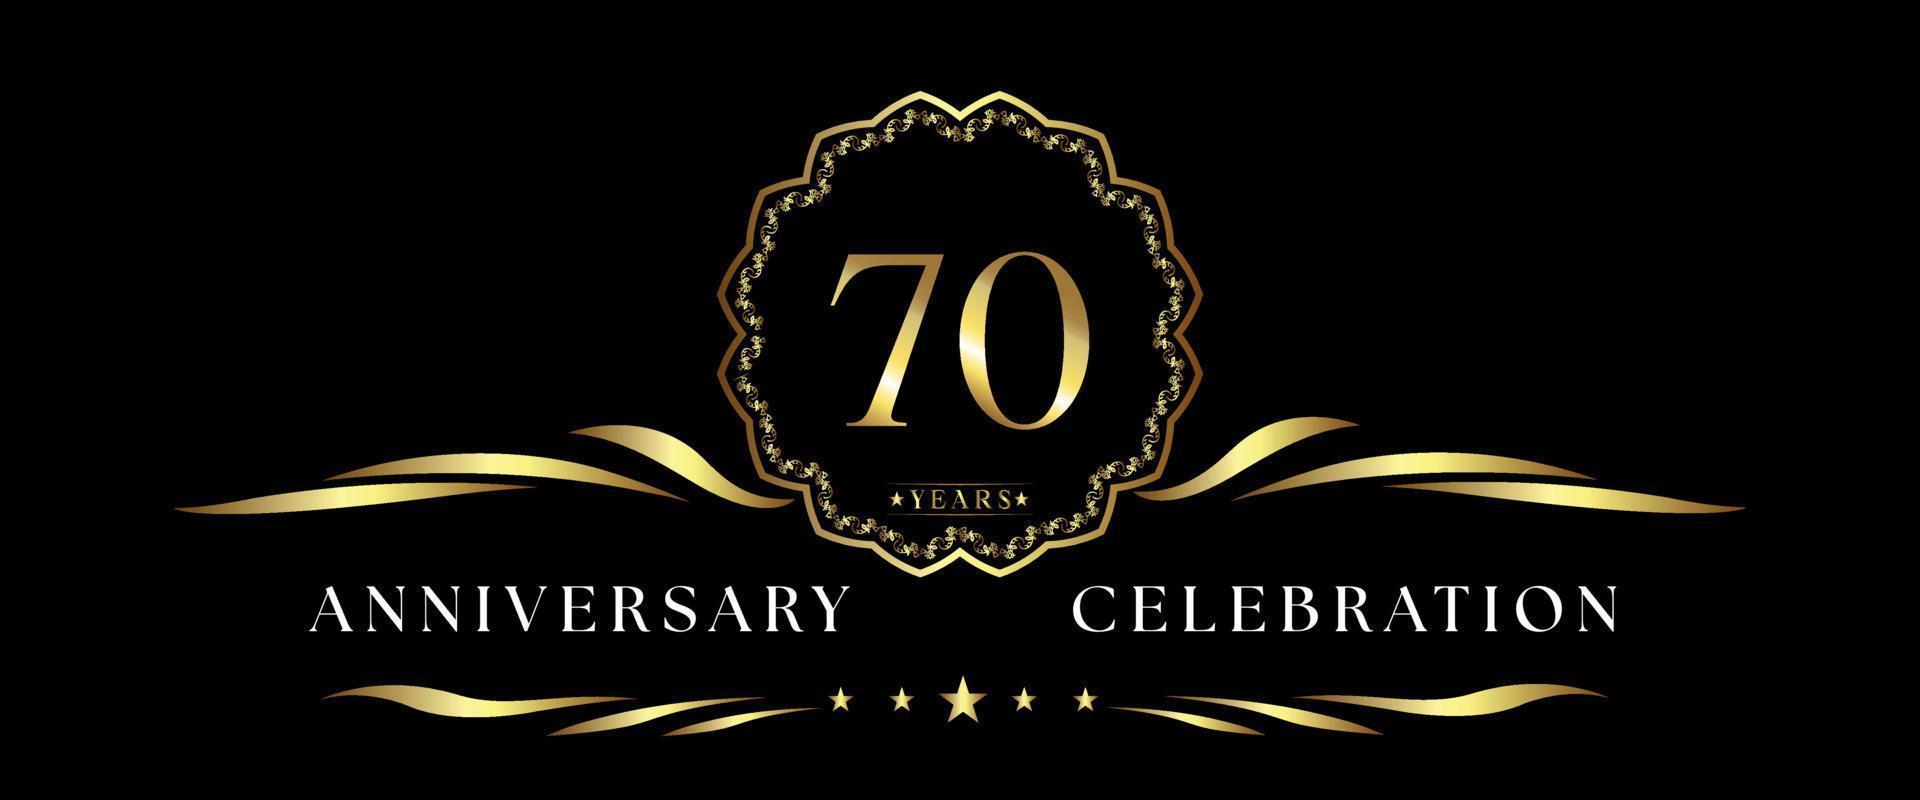 70 years anniversary celebration with gold decorative frame isolated on black background. Vector design for greeting card, birthday party, wedding, event party, ceremony. 70 years Anniversary logo.